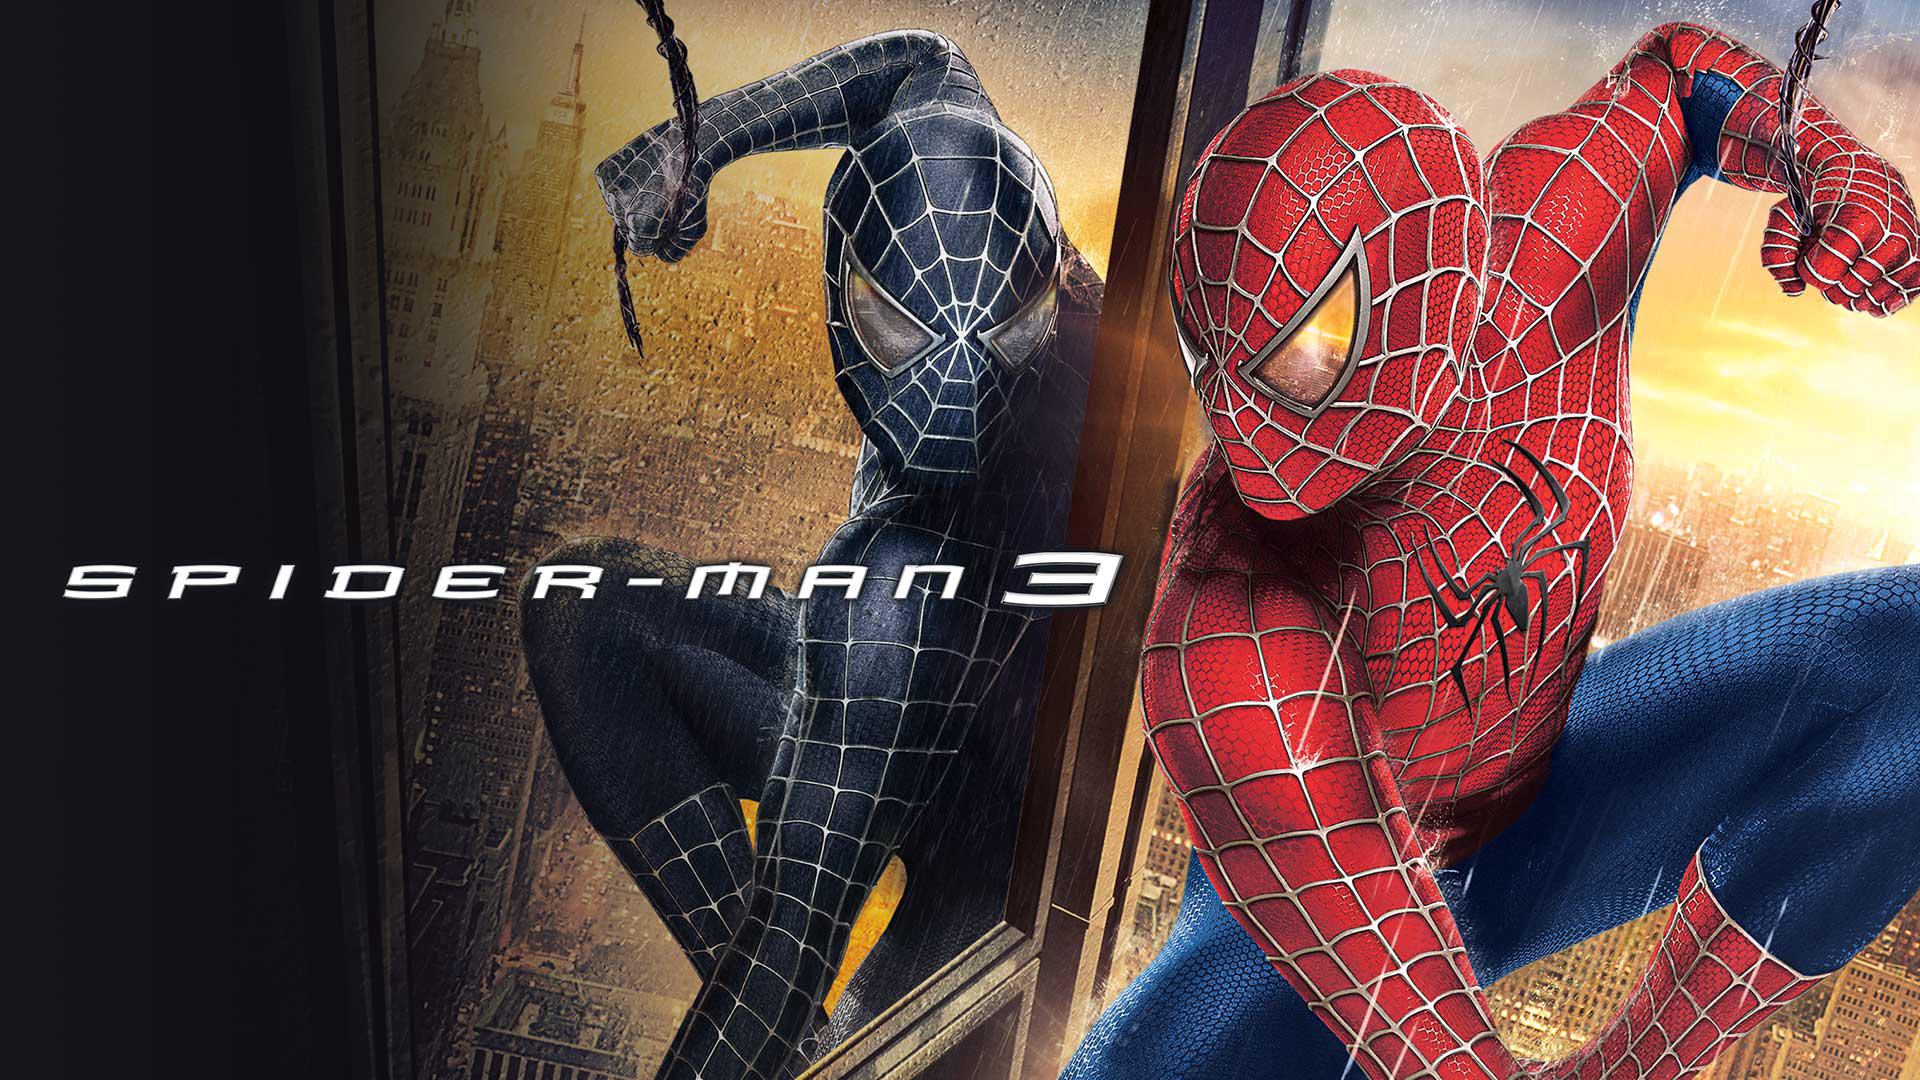 Watch Spider Man 3 Full Movie Online in HD Quality | Download Now